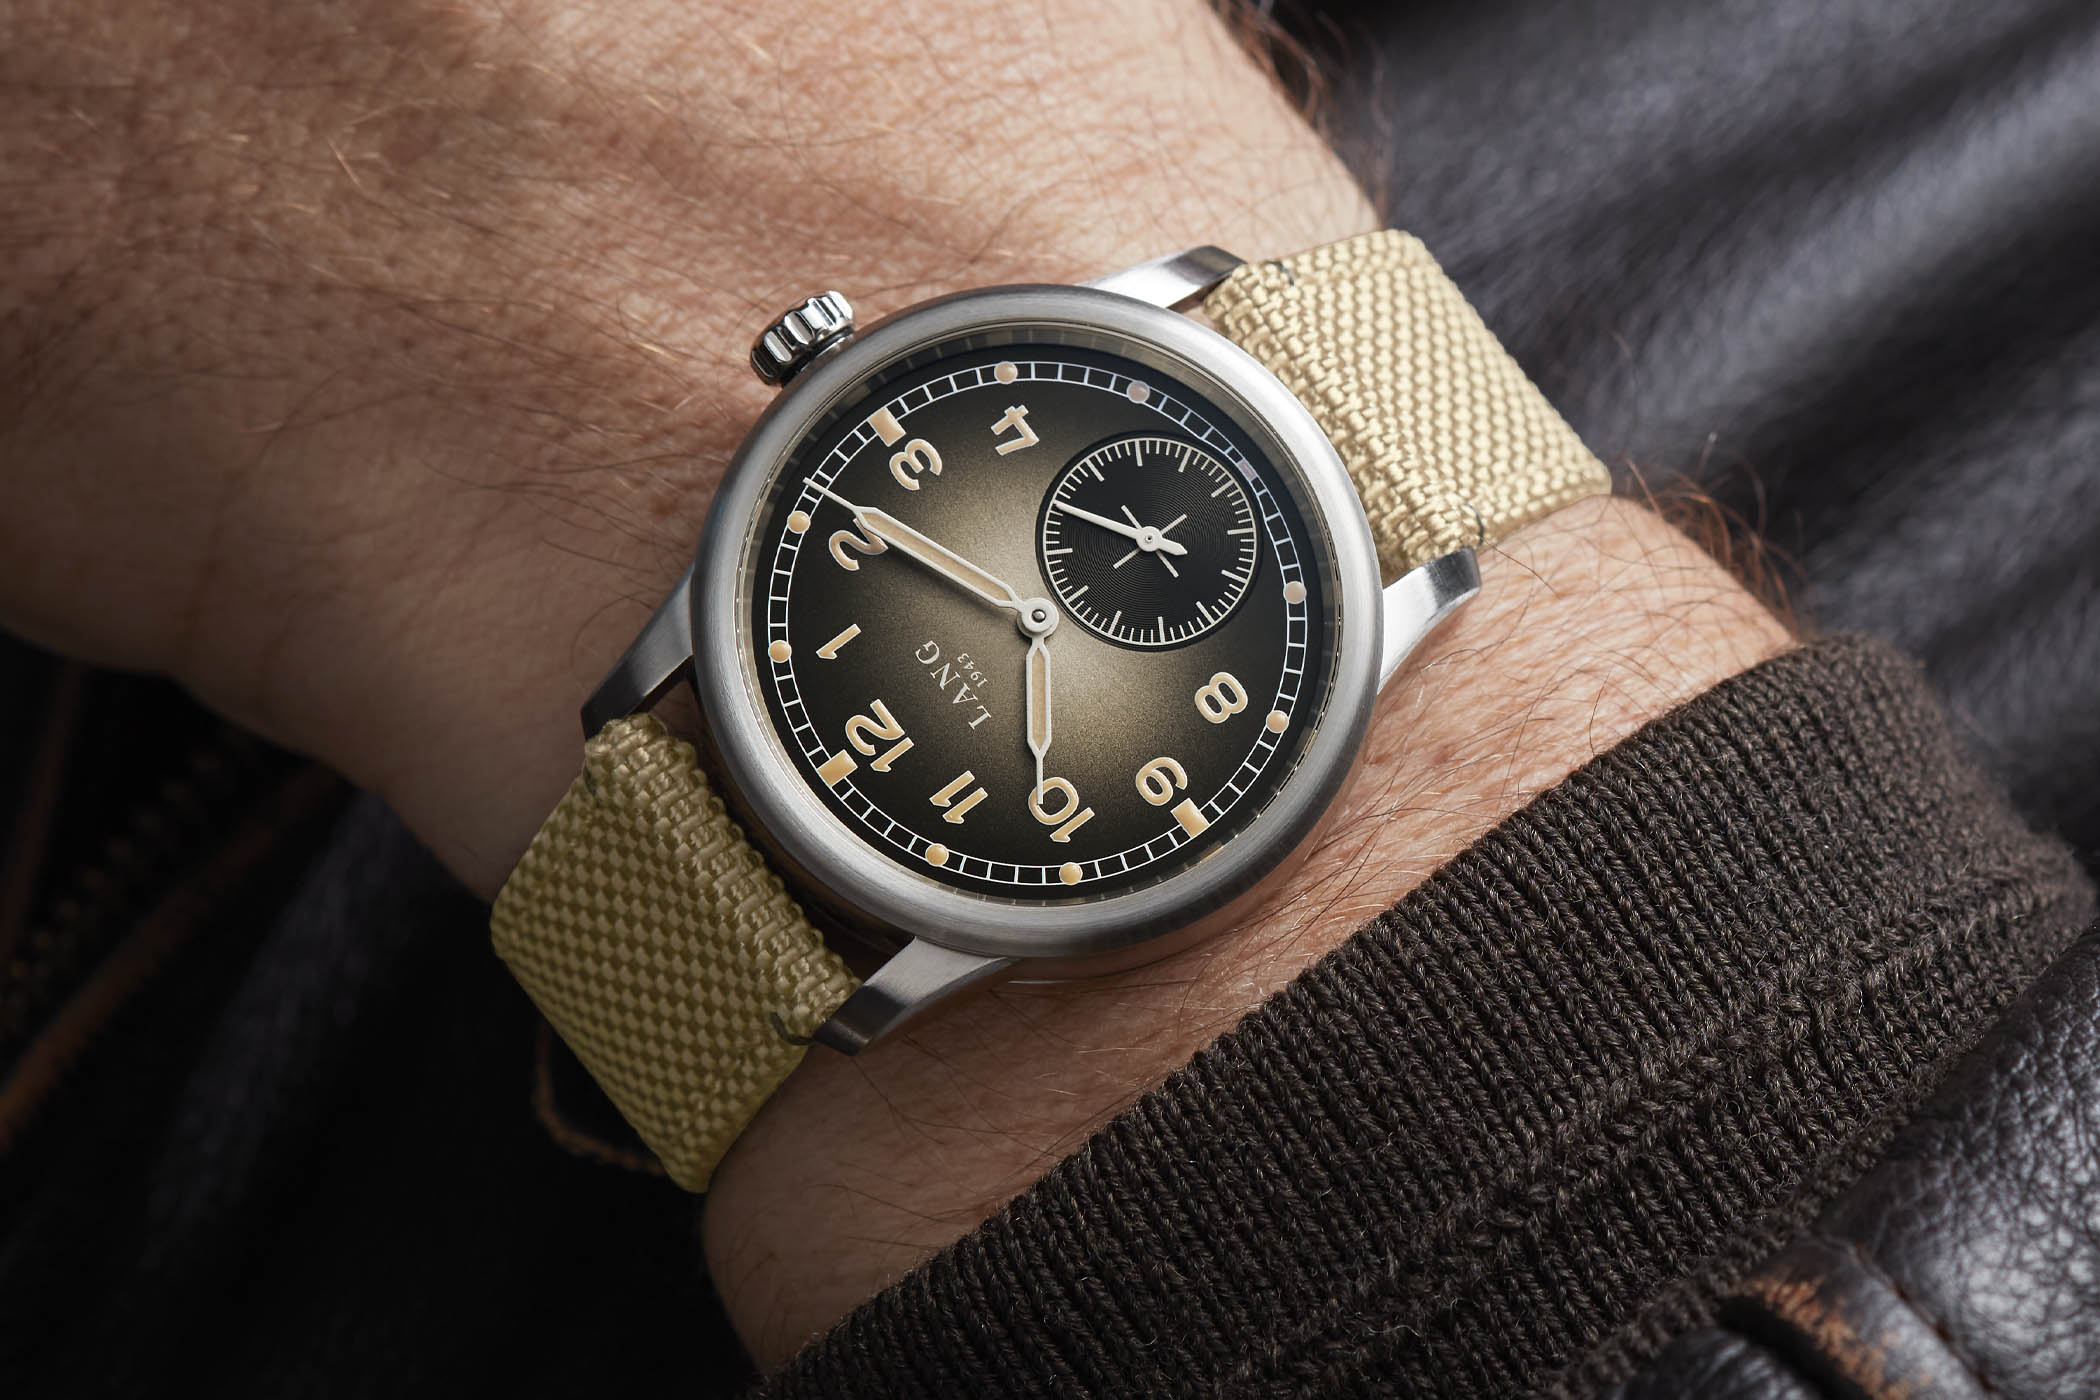 Lang 1943 Field Watch Edition One